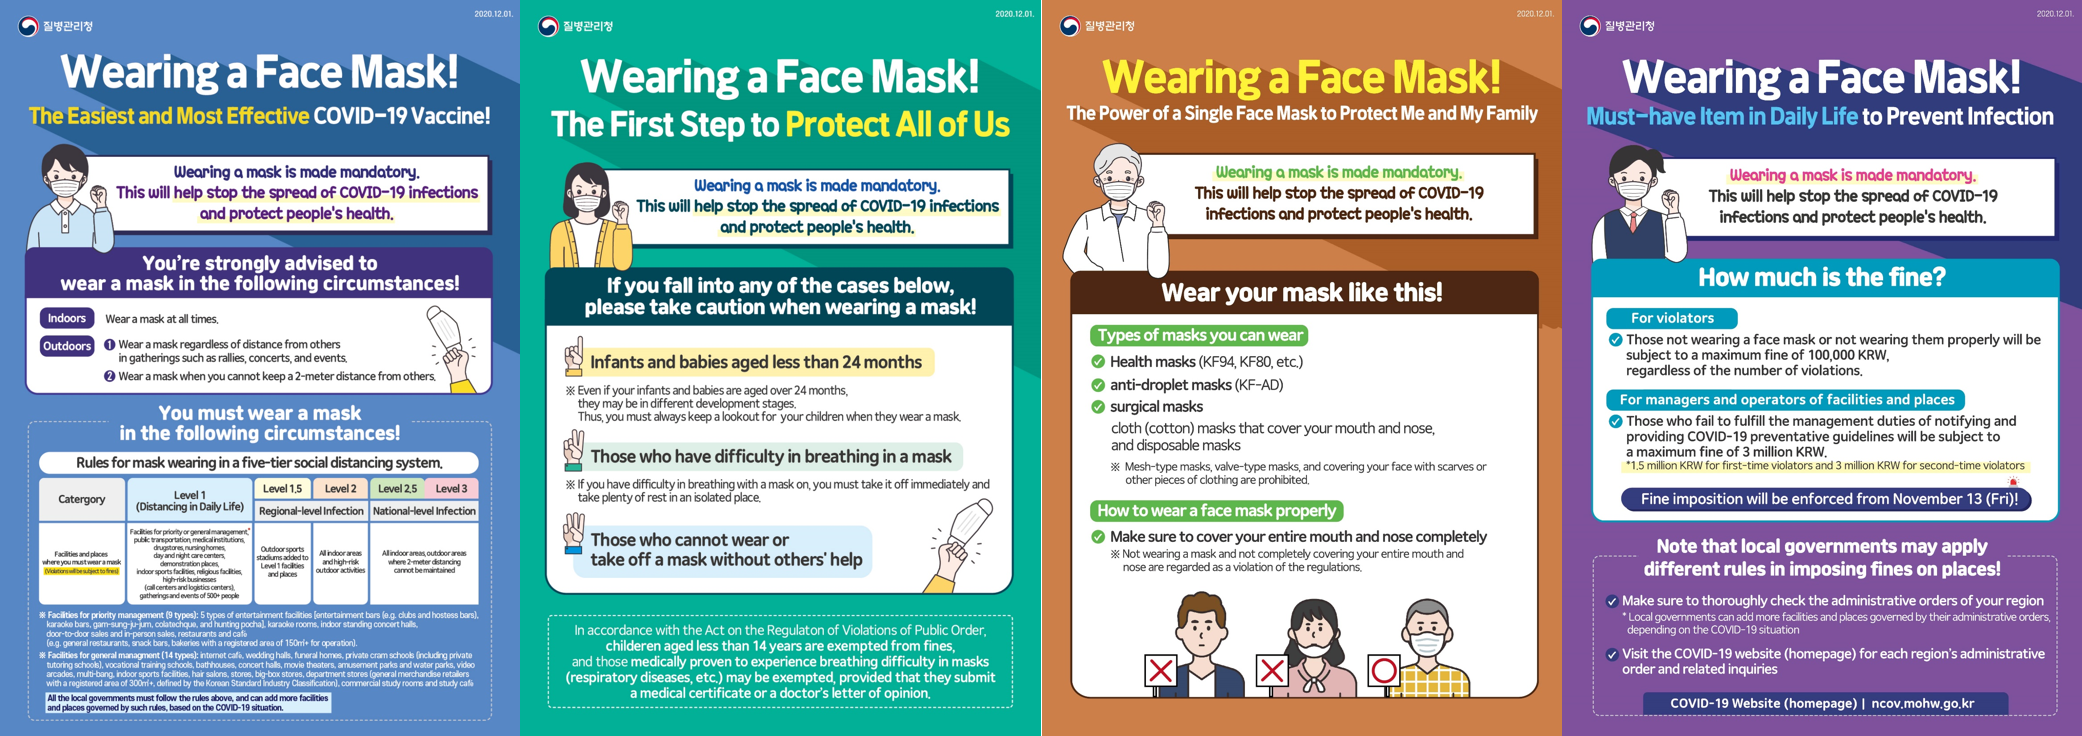 Wearing a Face Mask! The Easiest and Most Effective COVID-19 Vaccine! Wearing a mask is made mandatory. This will help stop the spread of COVID-19 infections and protect people's health. You’re strongly advised to wear a mask in the following circumstances! Indoors Wear a mask at all times. Outdoors 1) Wear a mask regardless of distance from others in gatherings such as rallies, concerts, and events. 2) Wear a mask when you cannot keep a 2-meter distance from others. You must wear a mask in the following circumstances! Rules for mask wearing in a five-tier social distancing system. Catergory. Facilities and places where you must wear a mask(Violations will be subject to fines). Level 1 (Distancing in Daily Life). Facilities for priority or general management, public transportation, medical institutions, drugstores, nursing homes, day and night care centers, demonstration places, indoor sports facilities, religious facilities, high-risk businesses (call centers and logistics centers), gatherings and events of 500+ people. Level 1.5 (Regional-level Infection). Outdoor sports stadiums added to Level 1 facilities and places. Level 2 (Regional-level Infection). All indoor areas and high-risk outdoor activities. Levels 2.5 and 3 (National-level Infection). All indoor areas, outdoor areas where 2-meter distancing cannot be maintained. * Facilities for priority management (9 types): 5 types of entertainment facilities [entertainment bars (e.g. clubs and hostess bars), karaoke bars, gam-sung-ju-jum, colatechque, and hunting pocha], karaoke rooms, indoor standing concert halls, door-to-door sales and in-person sales, restaurants and cafés (e.g. general restaurants, snack bars, bakeries with a registered area of 150㎡+ for operation). * Facilities for general managment (14 types): internet cafés, wedding halls, funeral homes, private cram schools (including private tutoring schools), vocational training schools, bathhouses, concert halls, movie theaters, amusement parks and water parks, video arcades, multi-bang, indoor sports facilities, hair salons, stores, big-box stores, department stores (general merchandise retailers with a registered area of 300㎡+, defined by the Korean Standard Industry Classification), commercial study rooms and study cafés. All the local governments must follow the rules above, and can add more facilities and places governed by such rules, based on the COVID-19 situation. Wearing a Face Mask! The First Step to Protect All of Us. Wearing a mask is made mandatory. This will help stop the spread of COVID-19 infections and protect people's health. If you fall into any of the cases below, please take caution when wearing a mask! Infants and babies aged less than 24 months. ※ Even if your infants and babies are aged over 24 months, they may be in different development stages. Thus, you must always keep a lookout for your children when they wear a mask. Those who have difficulty in breathing in a mask.※ If you have difficulty in breathing with a mask on, you must take it off immediately and take plenty of rest in an isolated place. Those who cannot wear or take off a mask without others' help. In accordance with the Act on the Regulaton of Violations of Public Order, childeren aged less than 14 years are exempted from fines, and those medically proven to experience breathing difficulty in masks (respiratory diseases, etc.) may be exempted, provided that they submit a medical certificate or a doctor’s letter of opinion. Wearing a Face Mask! The Power of a Single Face Mask to Protect Me and My Family. Wearing a mask is made mandatory. This will help stop the spread of COVID-19 infections and protect people's health. Wear your mask like this! Types of masks you can wear. Health masks (KF94, KF80, etc.), anti-droplet masks (KF-AD), surgical masks, cloth (cotton) masks that cover your mouth and nose, and disposable masks. ※ Mesh-type masks, valve-type masks, and covering your face with scarves or other pieces of clothing are prohibited. How to wear a face mask properly. Make sure to cover your entire mouth and nose completely. ※ Not wearing a mask and not completely covering your entire mouth and nose are regarded as a violation of the regulations. Wearing a Face Mask! Must-have Item in Daily Life to Prevent Infection. Wearing a mask is made mandatory. This will help stop the spread of COVID-19 infections and protect people's health. How much is the fine? For violators. Those not wearing a face mask or not wearing them properly will be subject to a maximum fine of 100,000 KRW, regardless of the number of violations. For managers and operators of facilities and places. Those who fail to fulfill the management duties of notifying and providing COVID-19 preventative guidelines will be subject to a maximum fine of 3 million KRW. *1.5 million KRW for first-time violators and 3 million KRW for second-time violators. Fine imposition will be enforced from November 13 (Fri)! Note that local governments may apply different rules in imposing fines on places! Make sure to thoroughly check the administrative orders of your region. * Local governments can add more facilities and places governed by their administrative orders, depending on the COVID-19 situation. Visit the COVID-19 website (homepage) for each region’s administrative order and related inquiries. COVID-19 Website (homepage): ncov.mohw.go.kr.